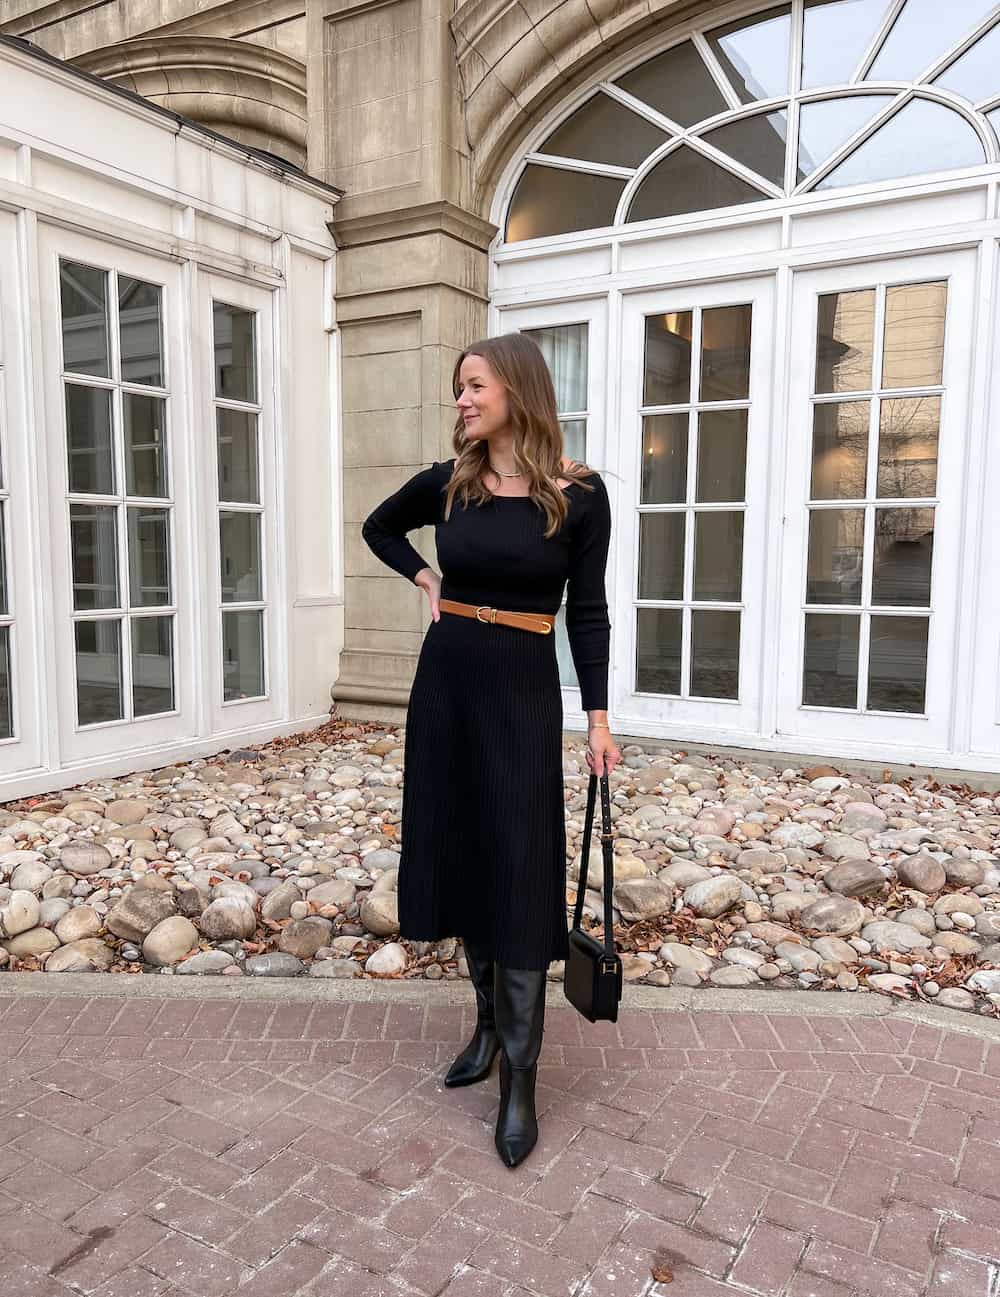 woman wearing a black knit midi dress from Lilysilk with black knee high boots and a brown belt at the waist